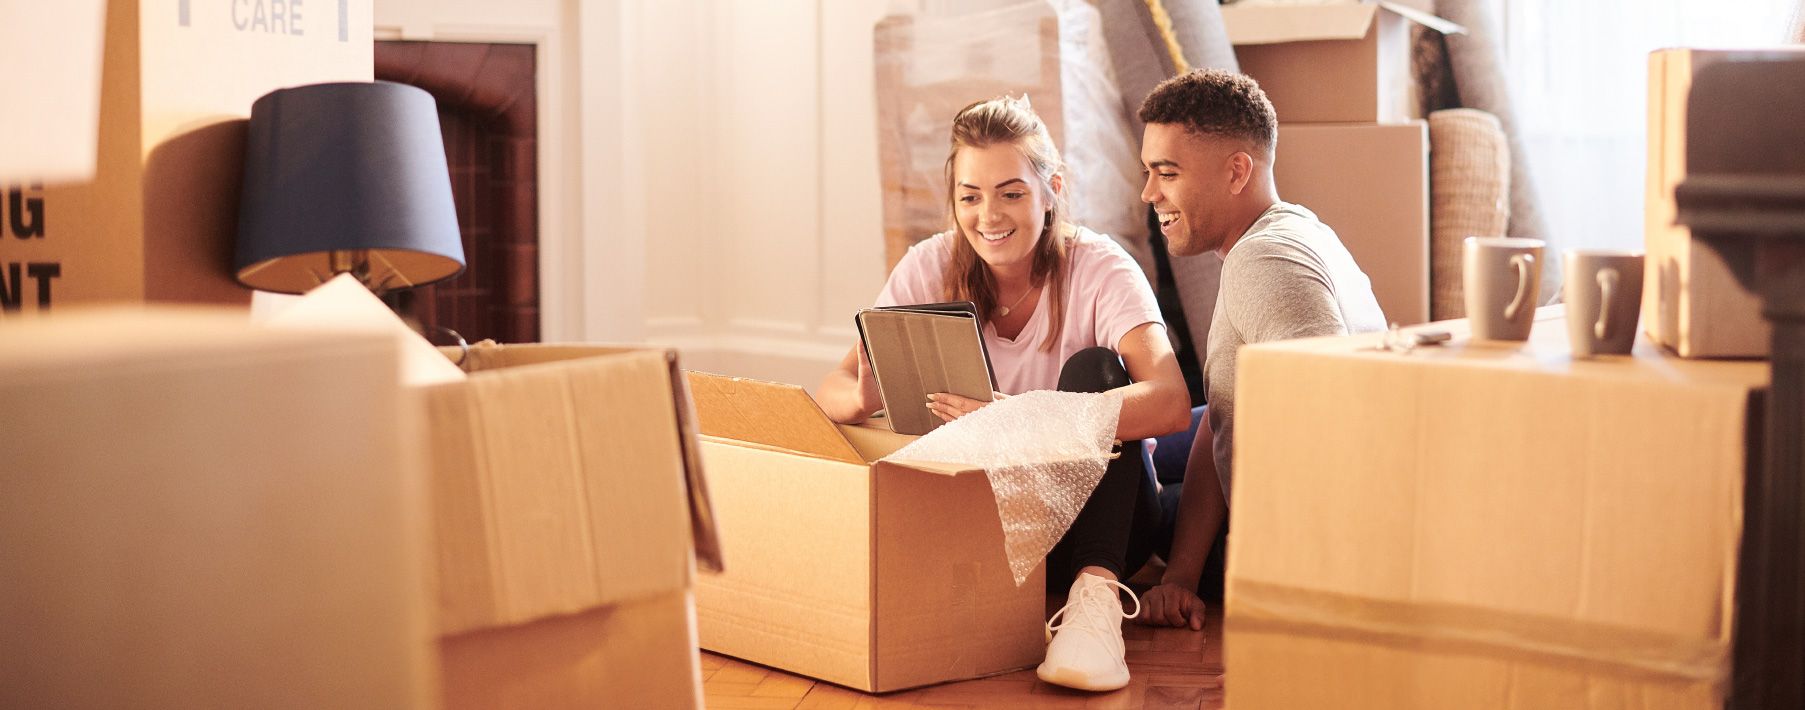 A young couple sits on the floor looking at a tablet surrounded by moving boxes